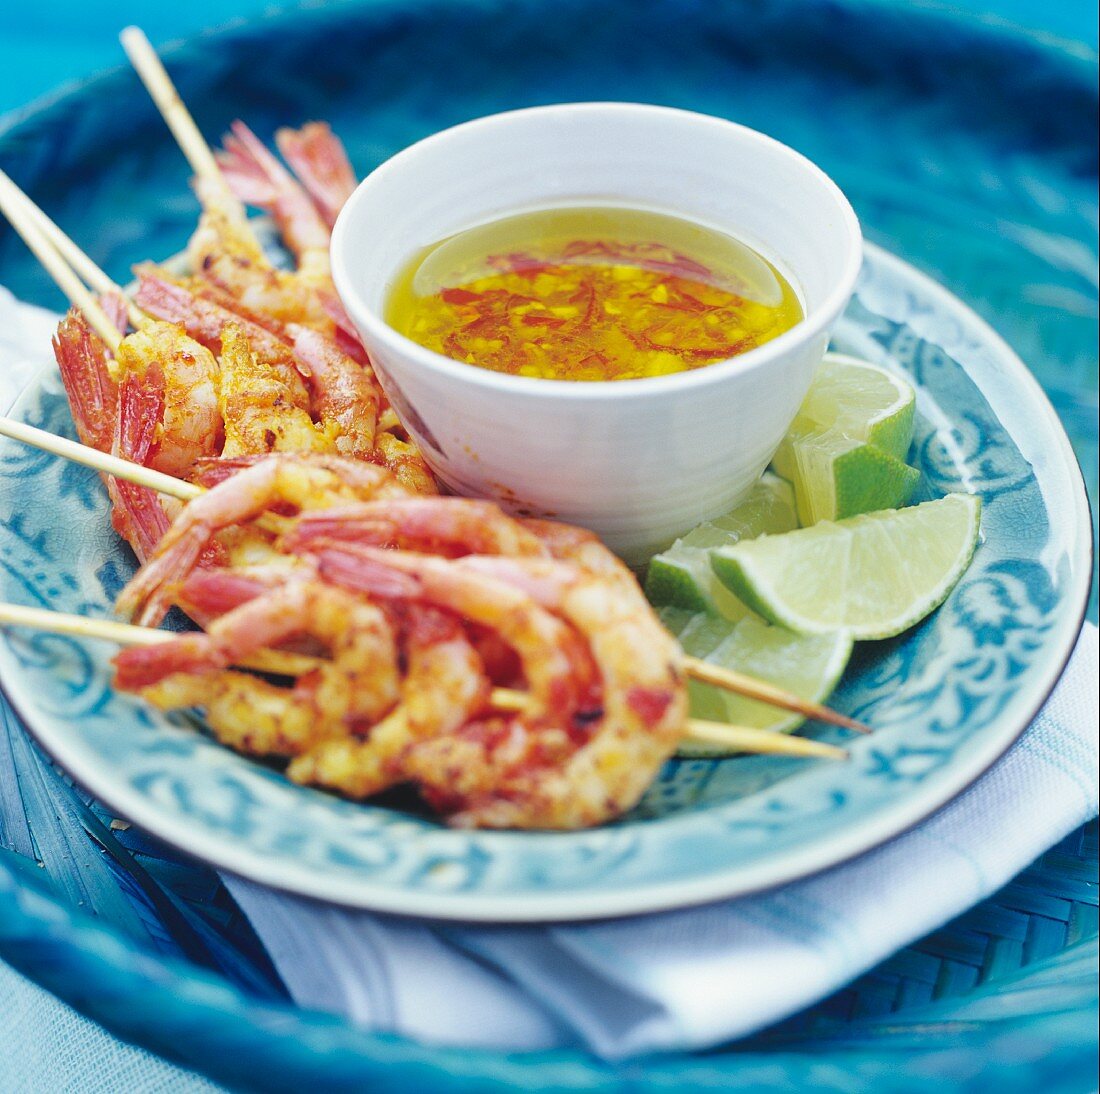 Prawn skewers with chilli sauce and limes